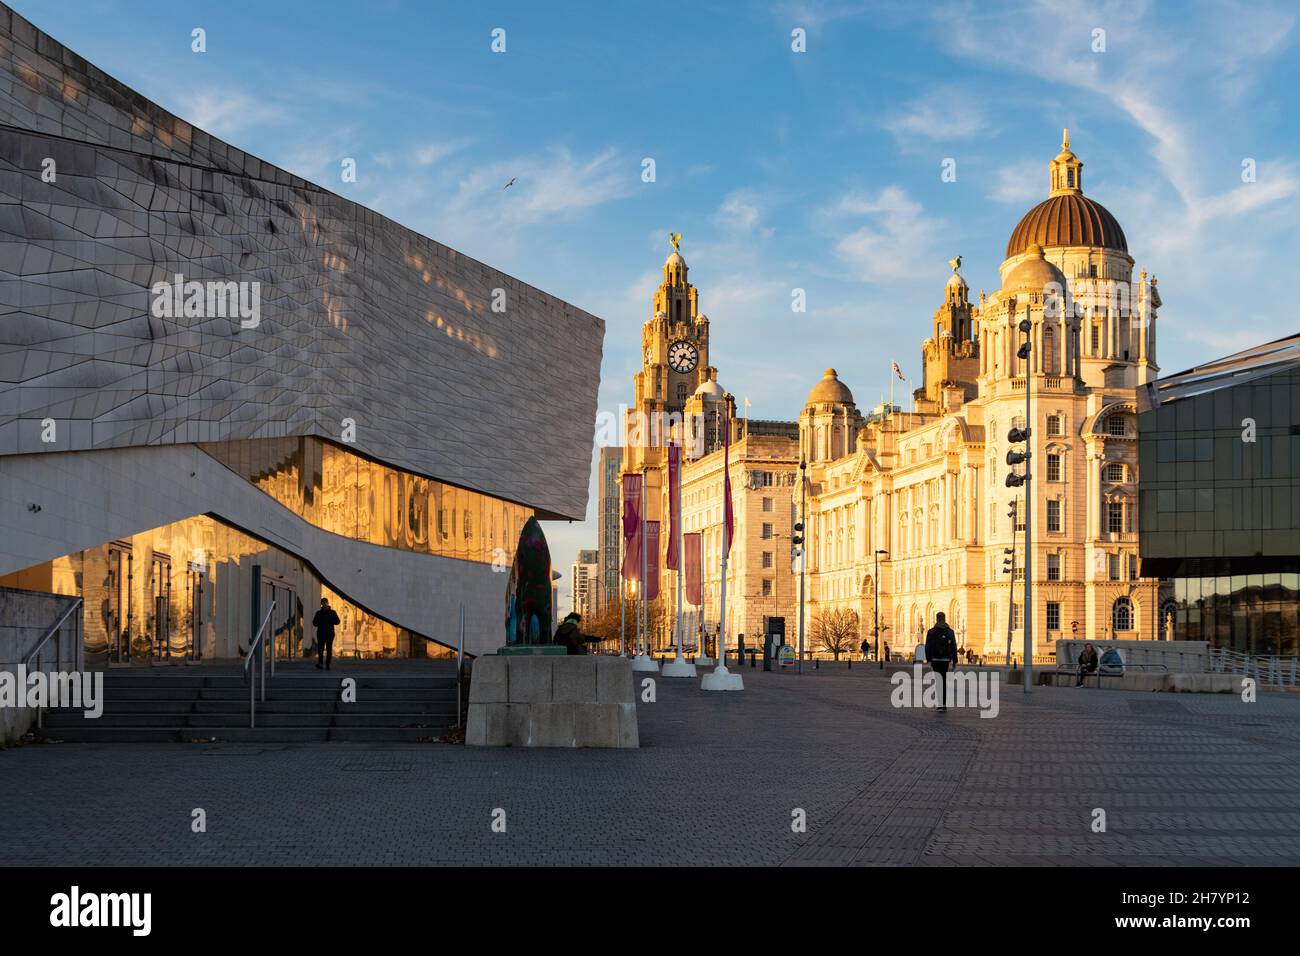 Liverpool waterfront - Pier Head, The Three Graces and Museum of Liverpool at sunset, Liverpool, England, UK Stock Photo